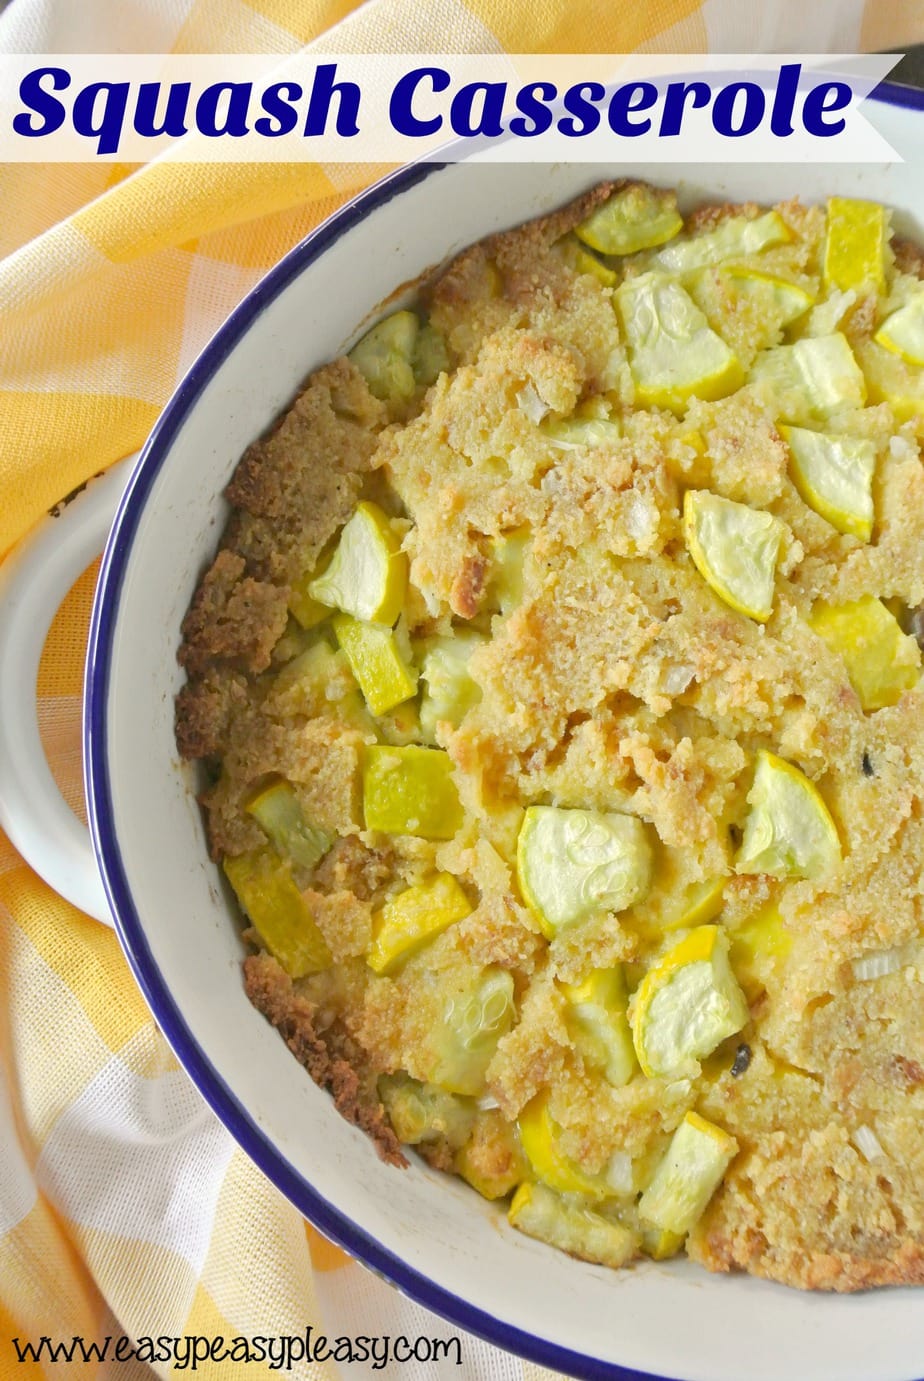 This easy to make squash casserole is the perfect way to use up all those garden veggies.